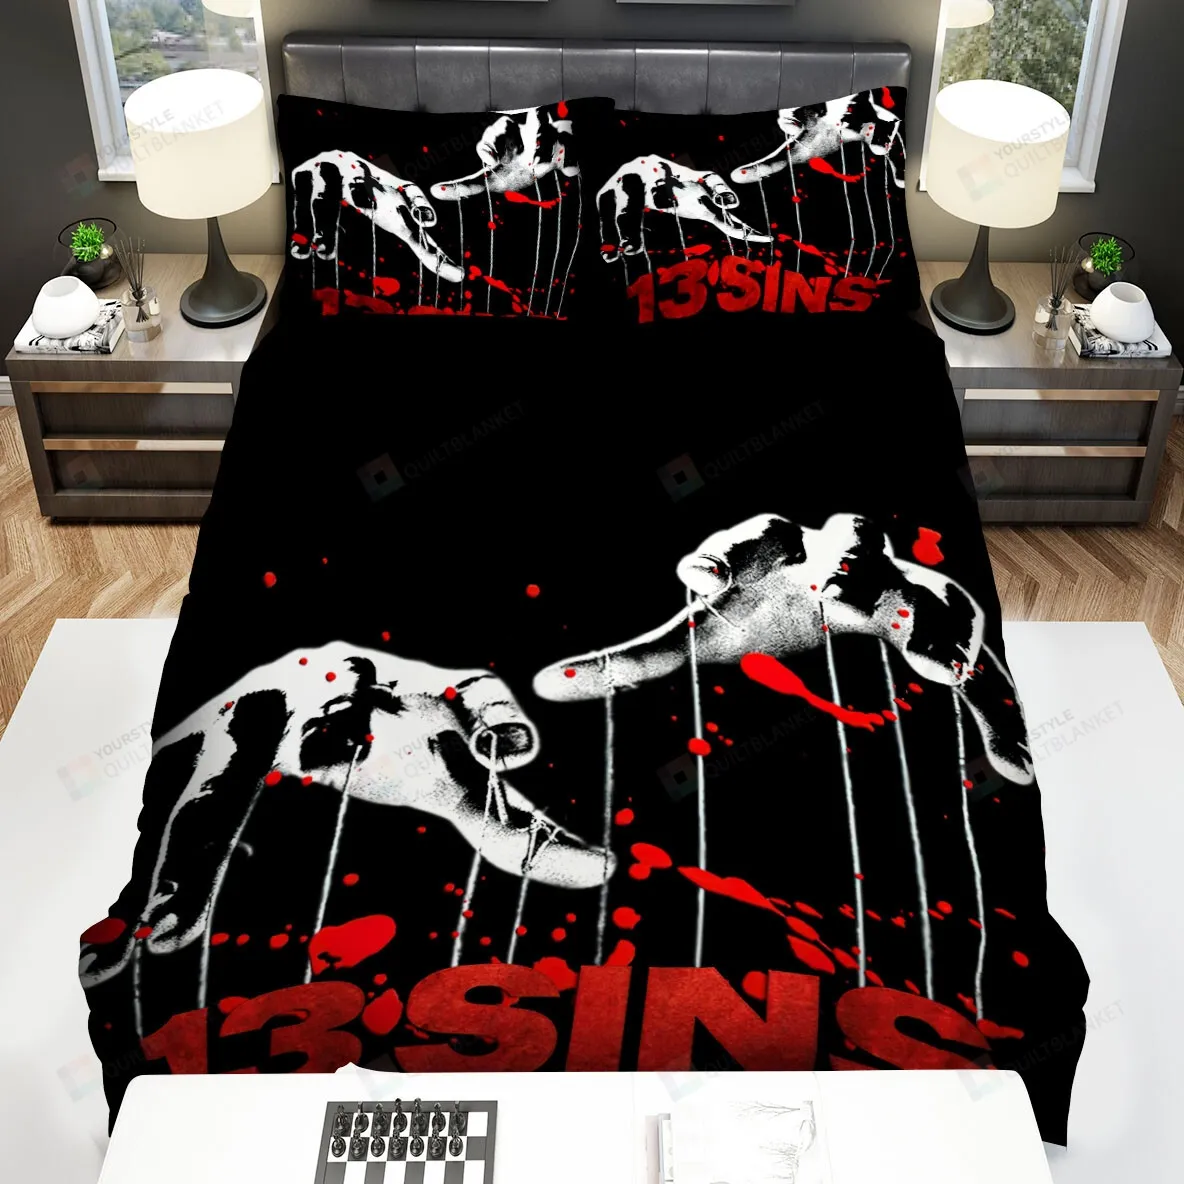 13 Sins The Hand With Blood Movie Poster Bed Sheets Spread Comforter Duvet Cover Bedding Sets